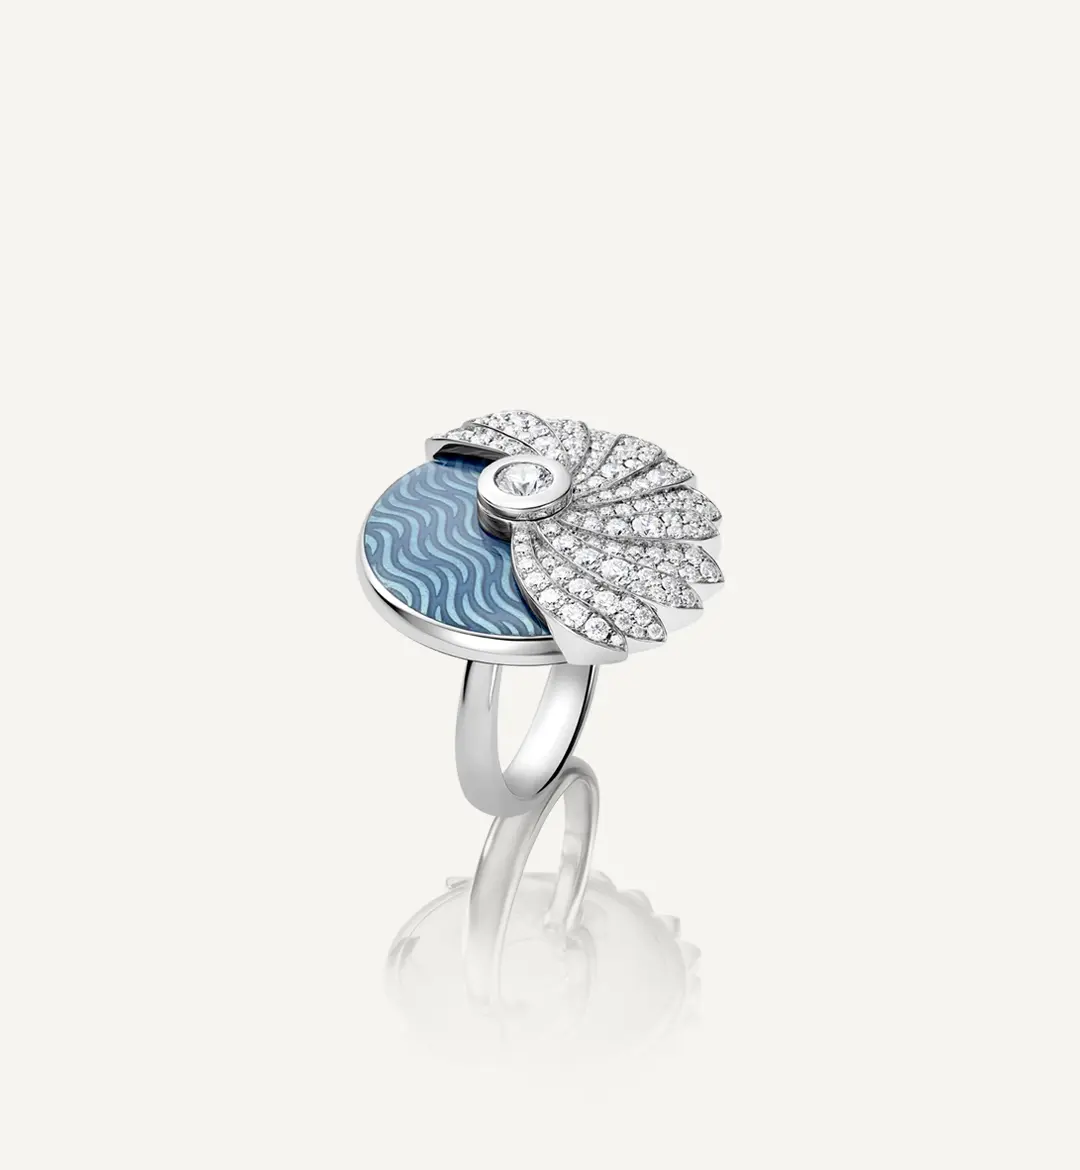 Twirly White gold ring by Adler Joailliers